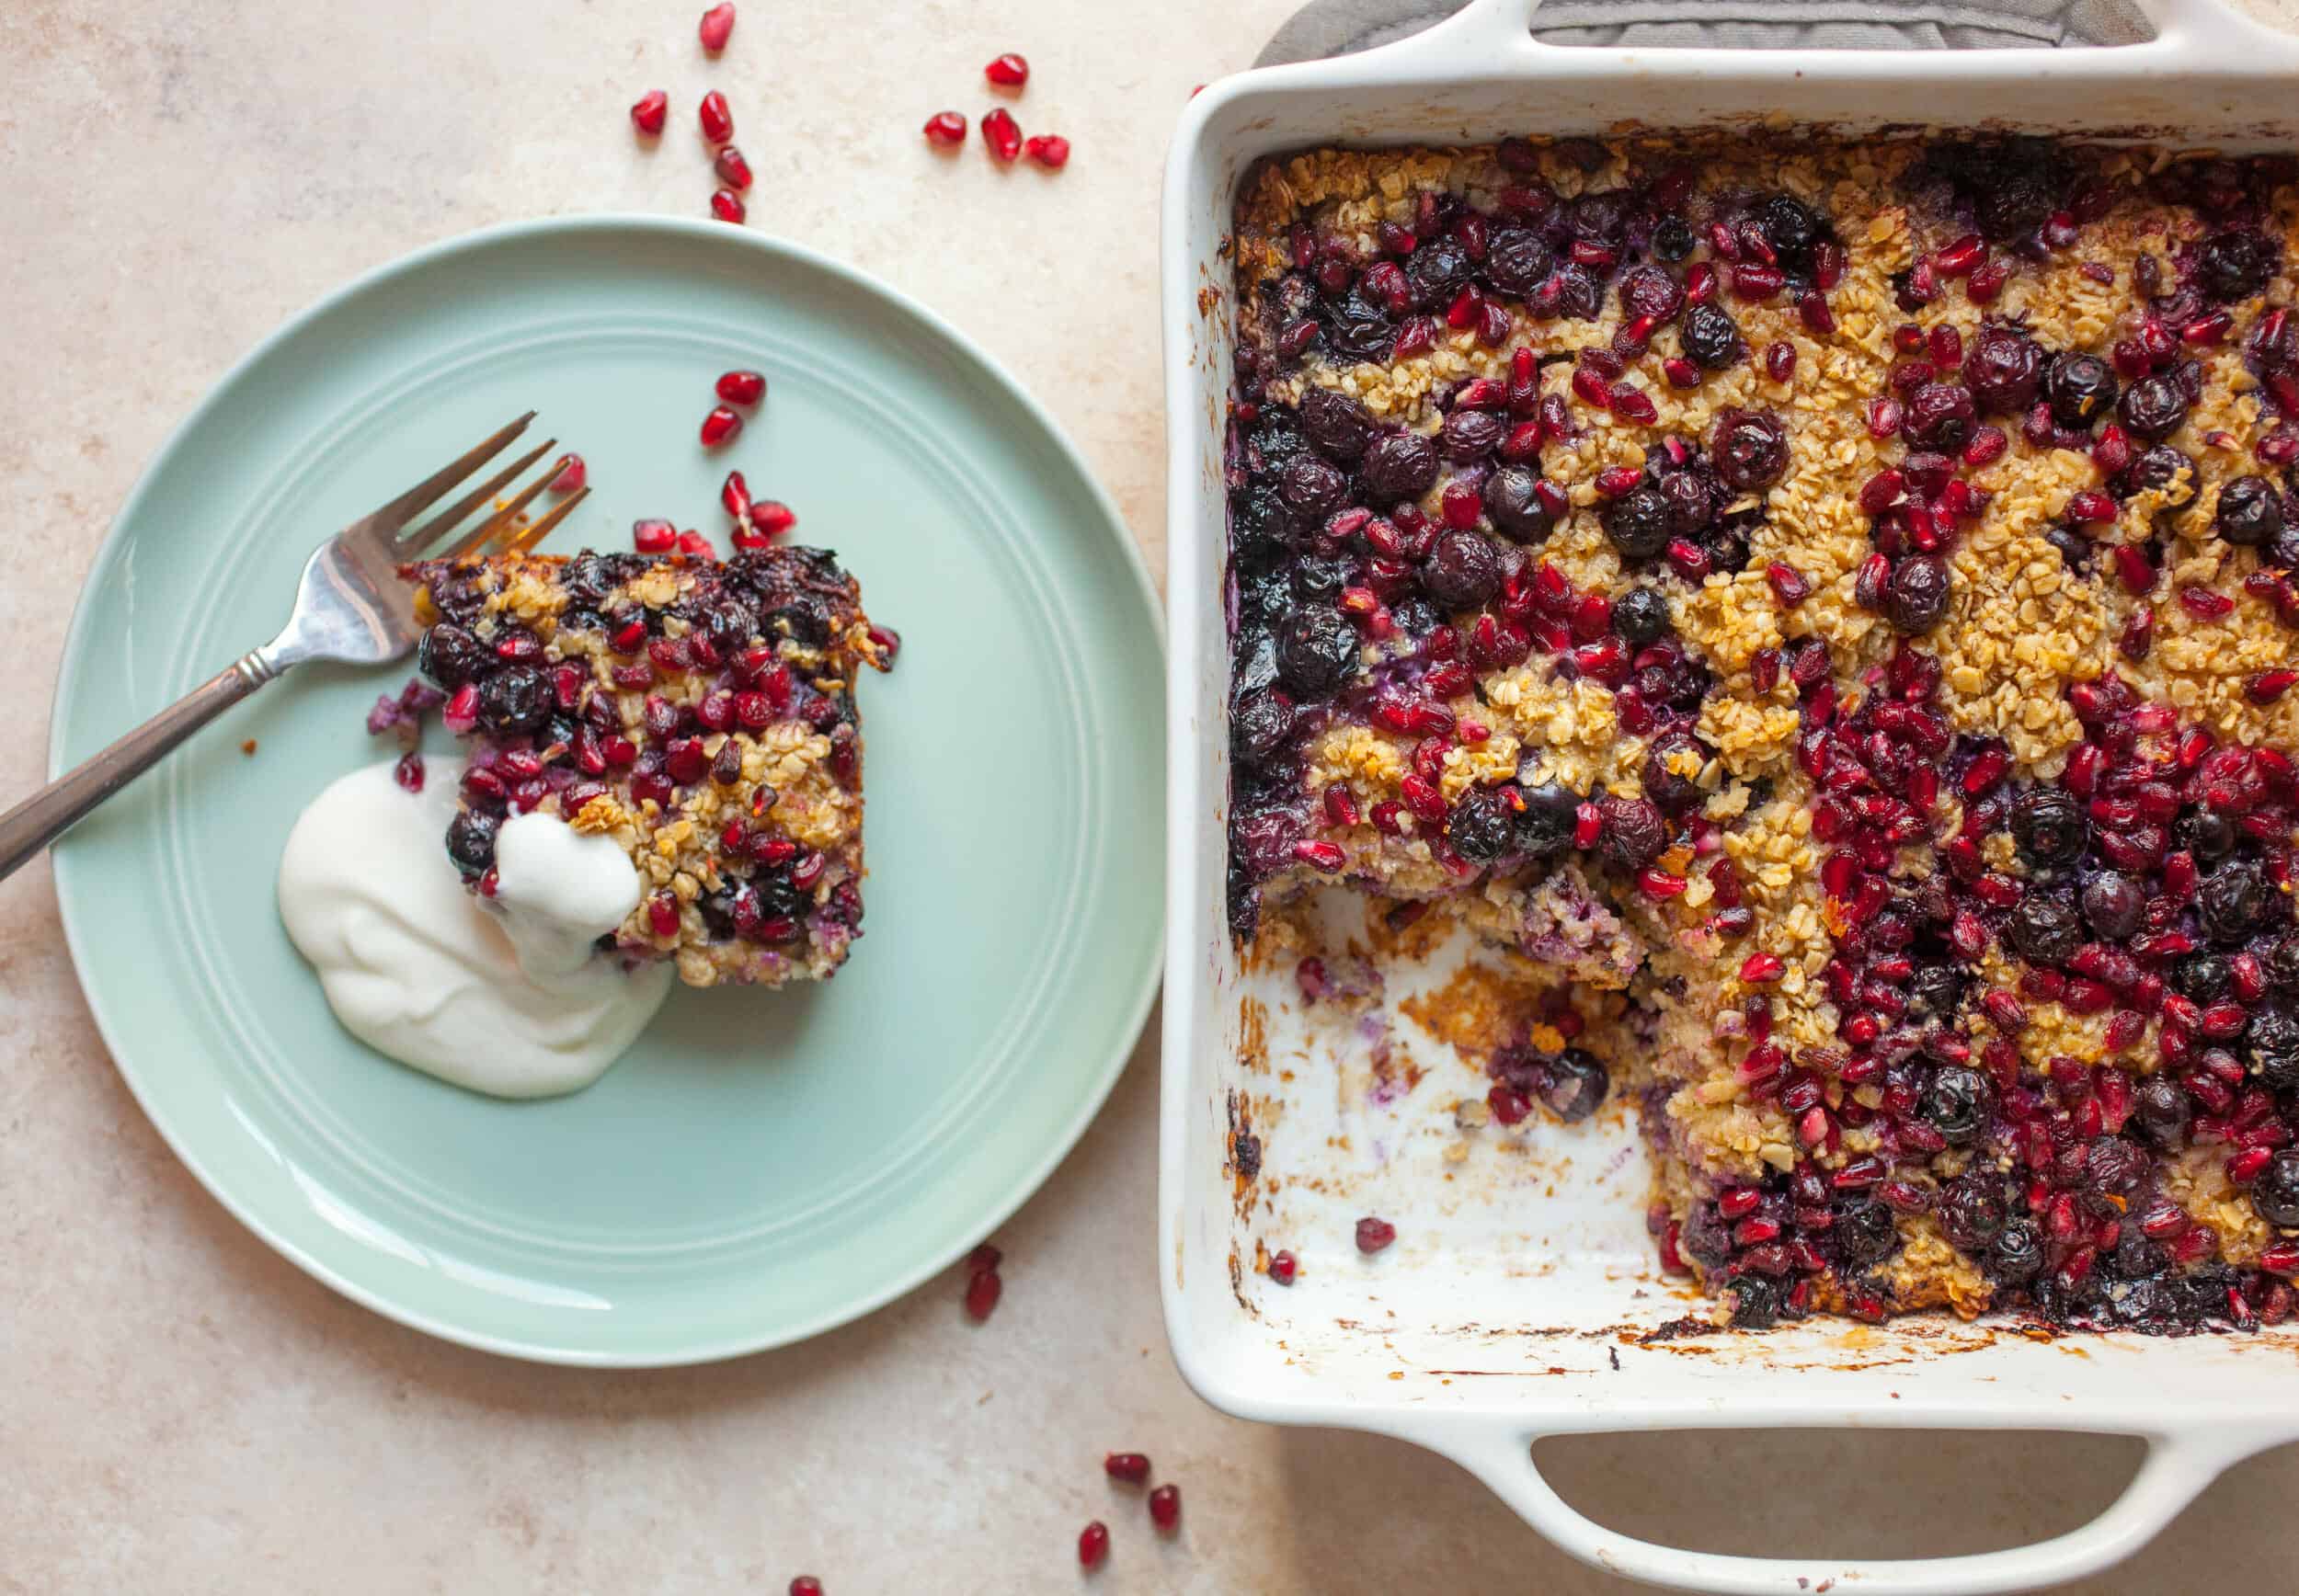 Blueberry Baked Oatmeal with Pomegranate Seeds Image